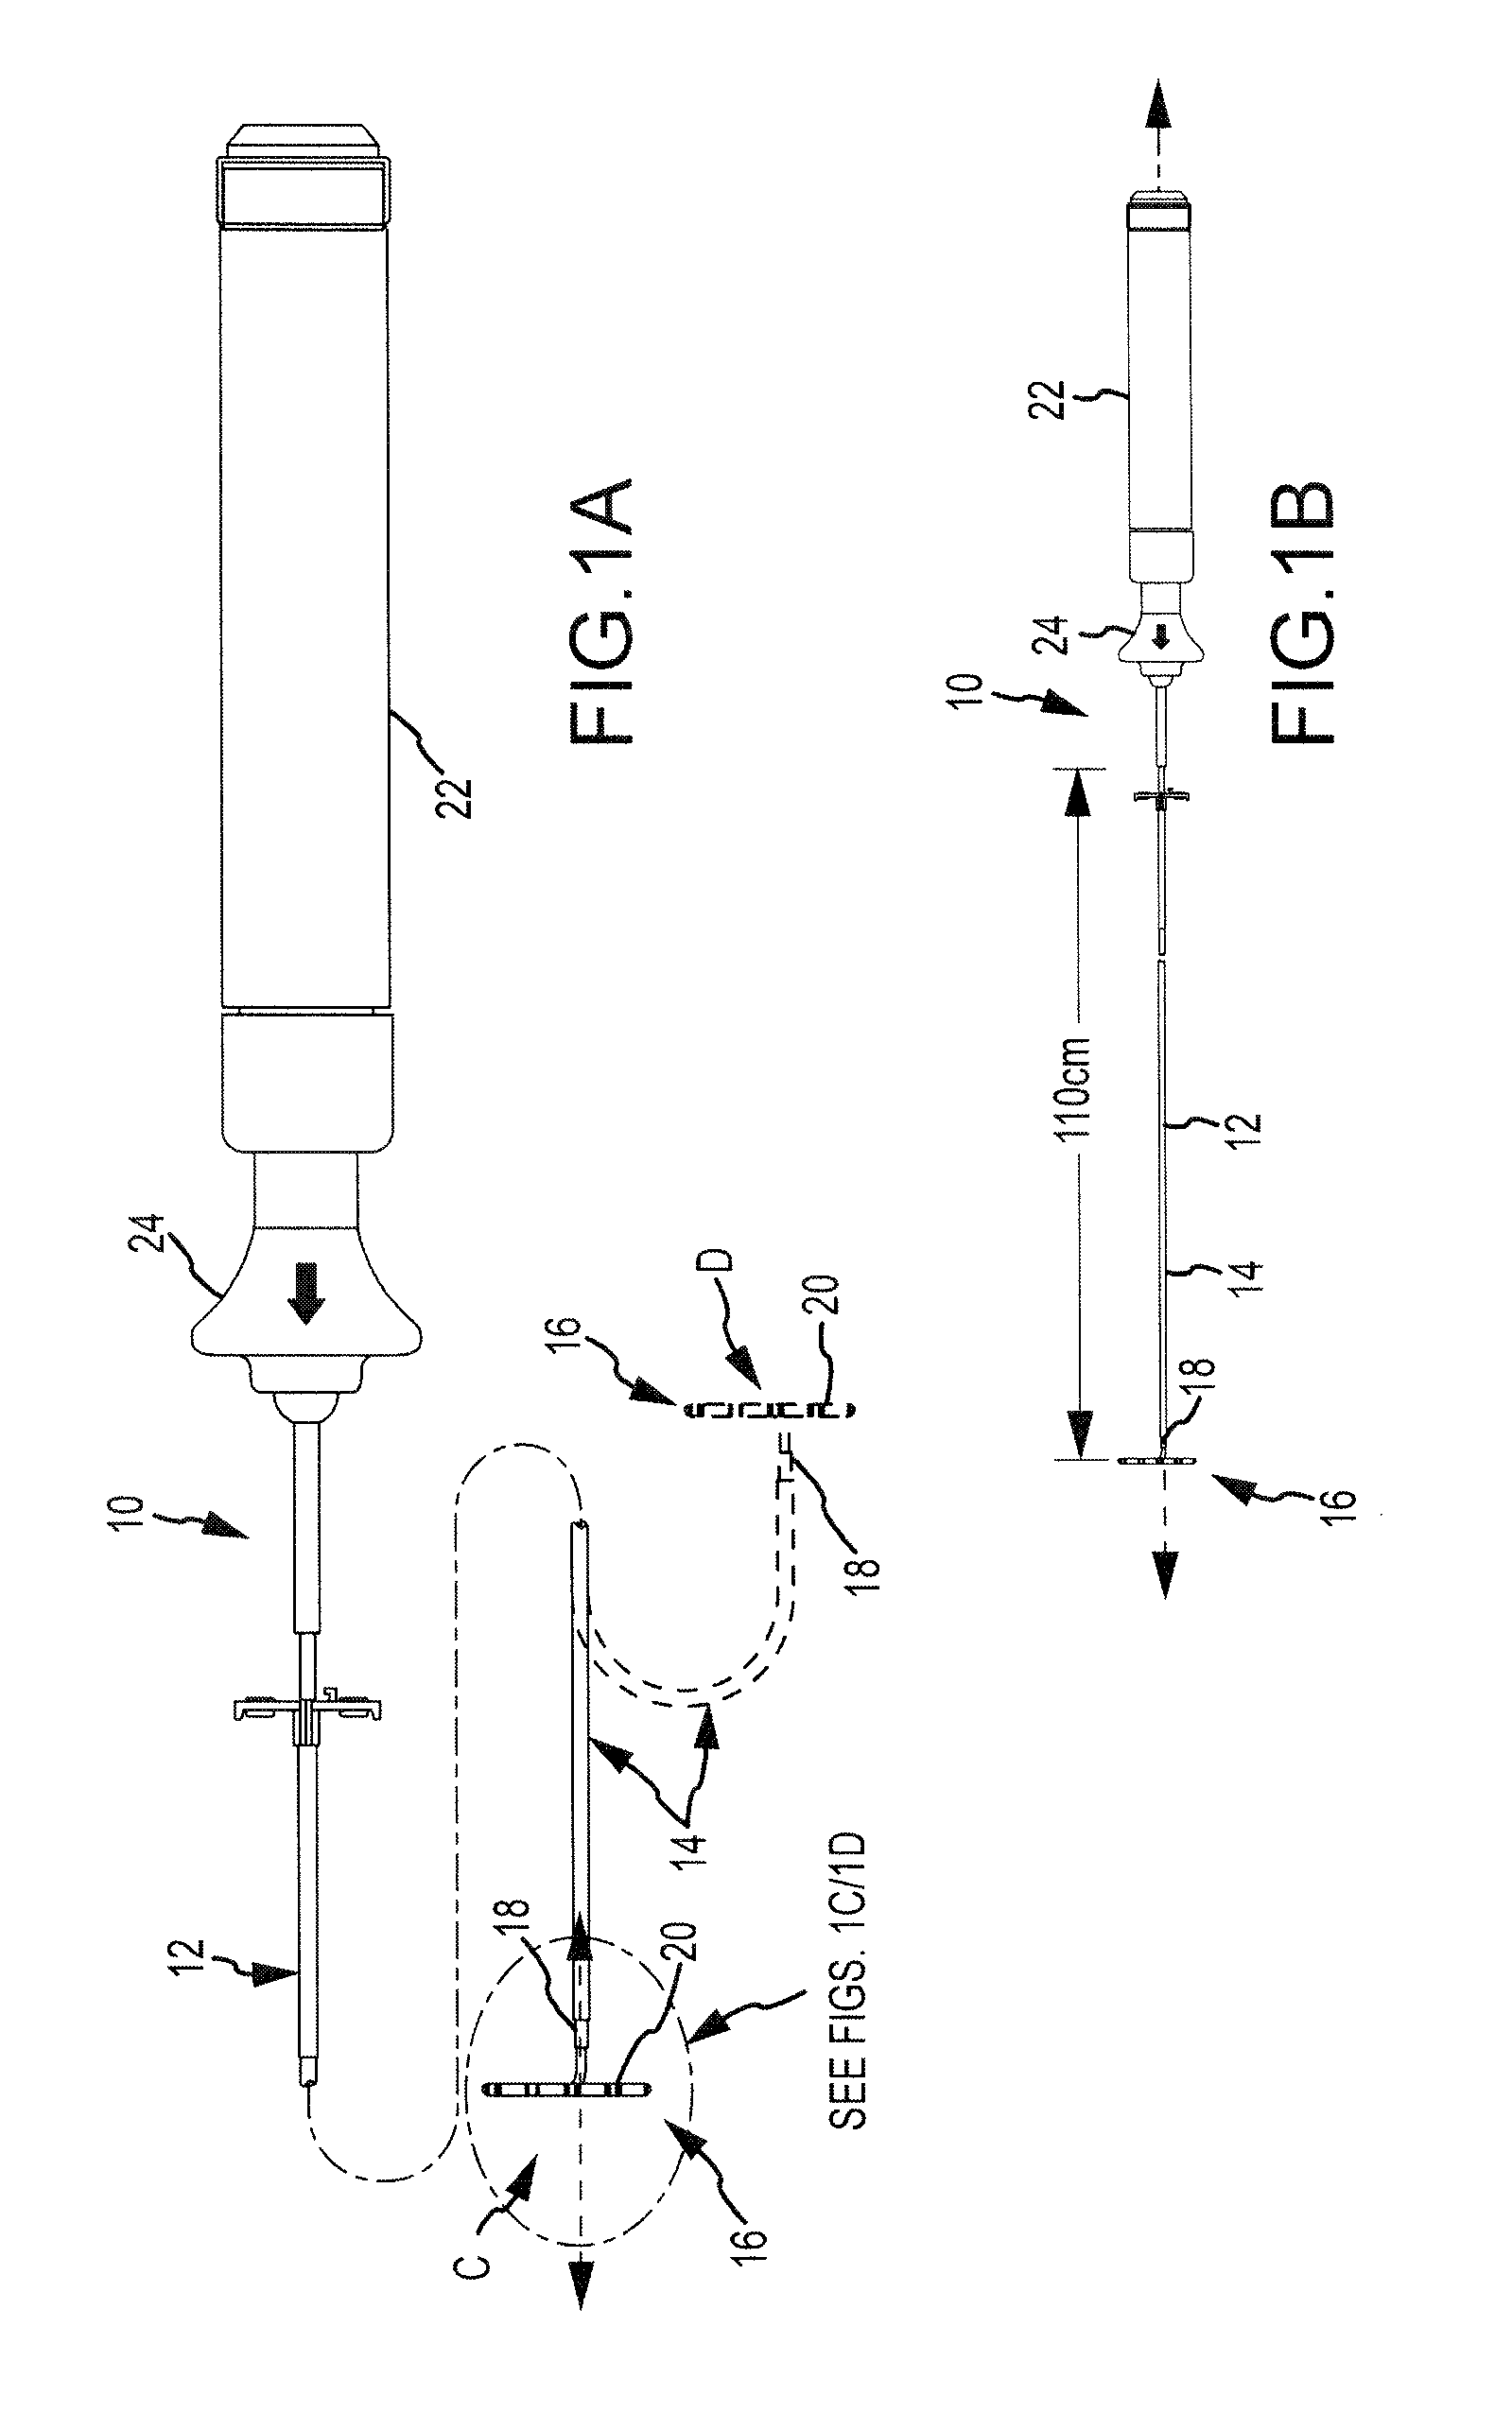 In-plane dual loop fixed diameter electrophysiology catheters and methods of manufacturing therefor